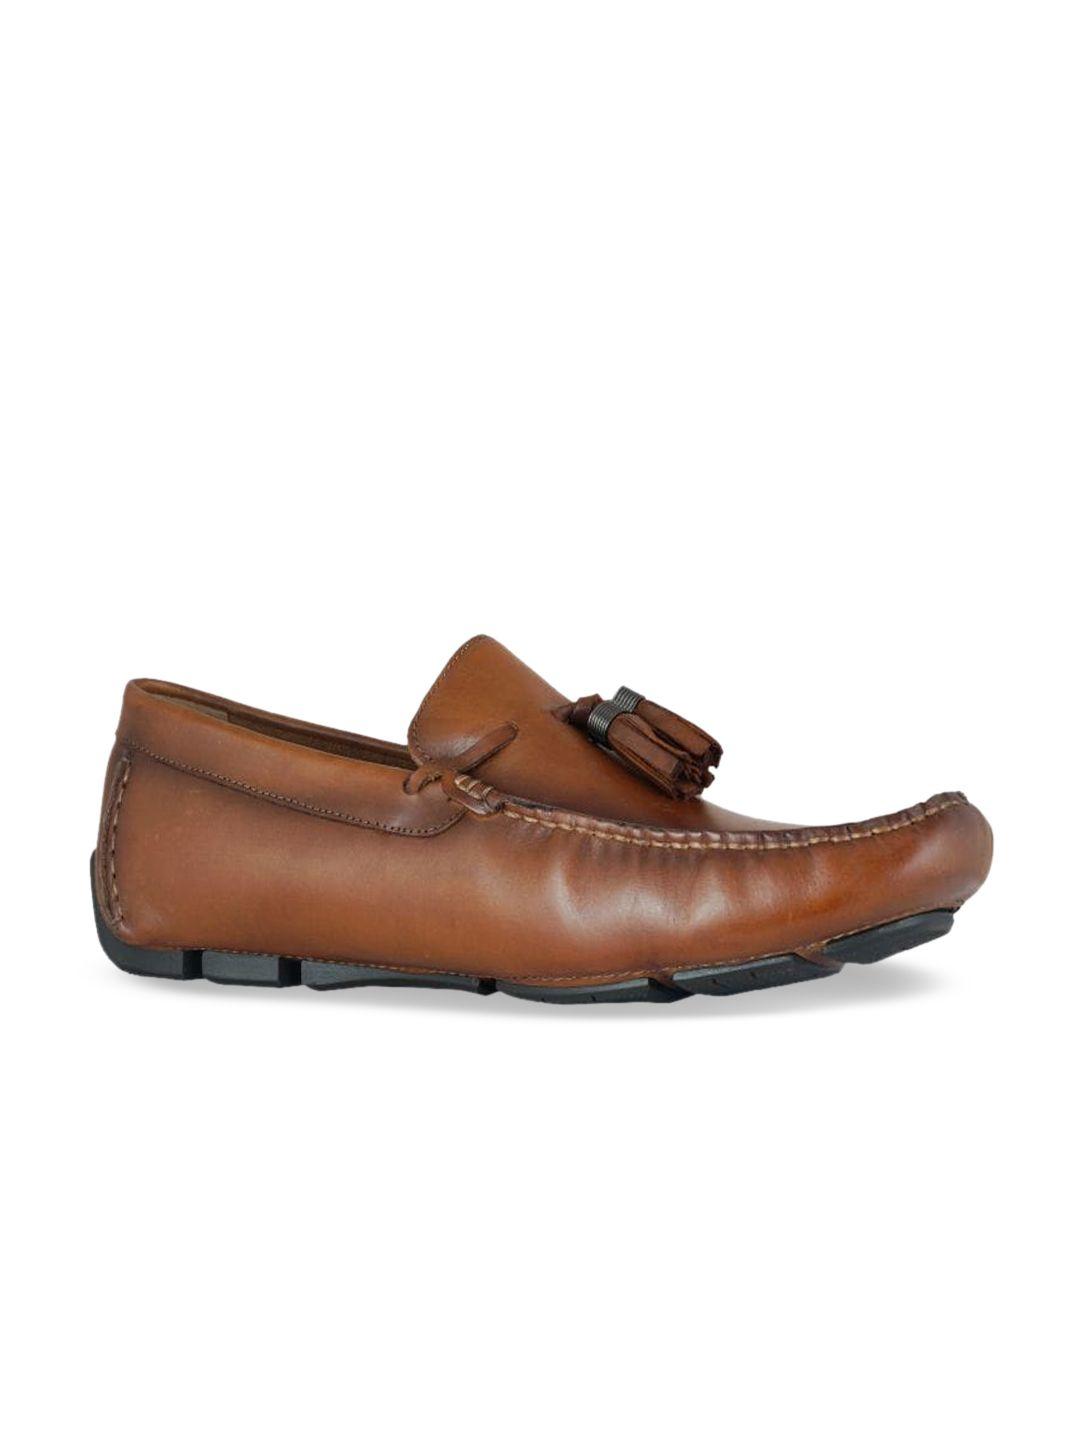 kenneth-cole-men-brown-leather-loafers